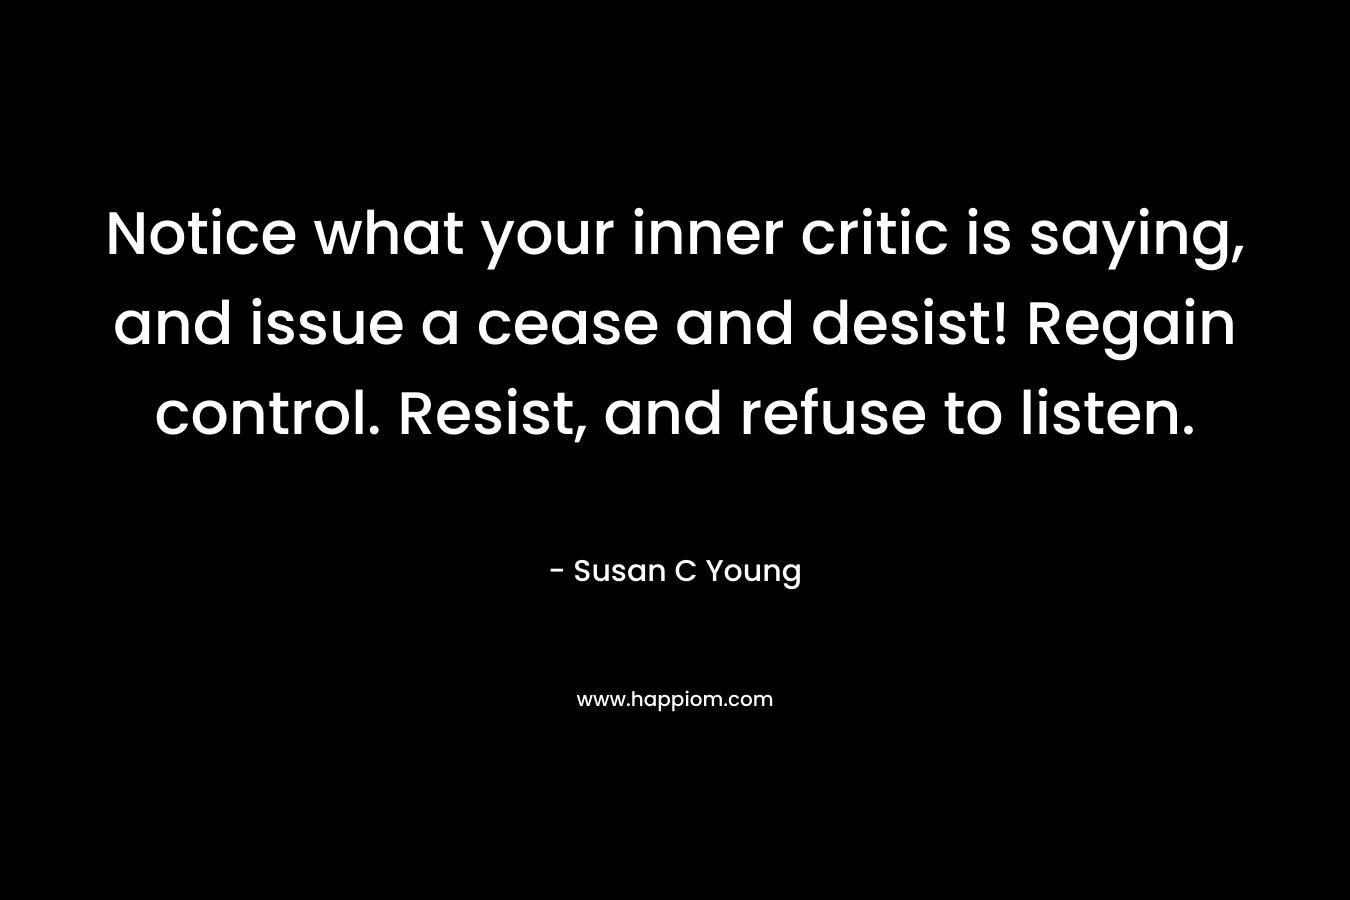 Notice what your inner critic is saying, and issue a cease and desist! Regain control. Resist, and refuse to listen. – Susan C Young